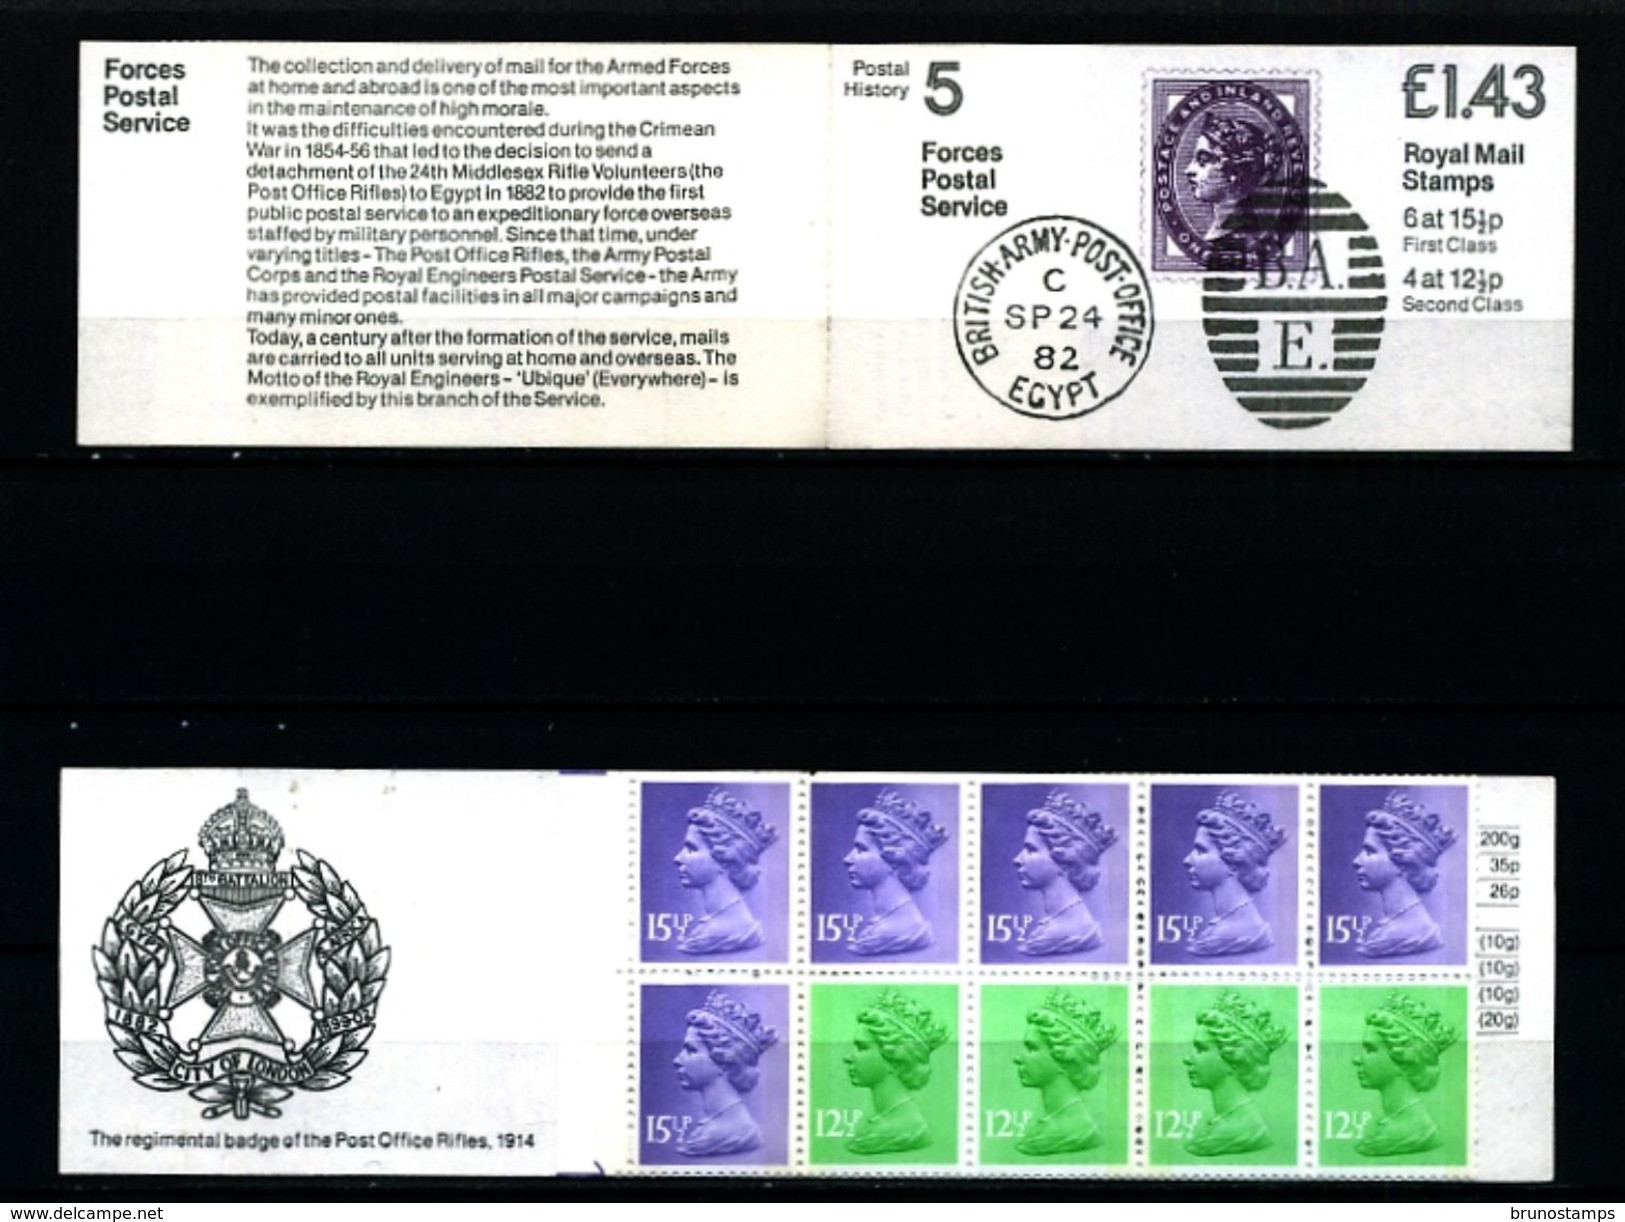 GREAT BRITAIN - 1982  £ 1.43  BOOKLET  FORCES MAIL  LM  MINT NH  SG FN 4a - Carnets